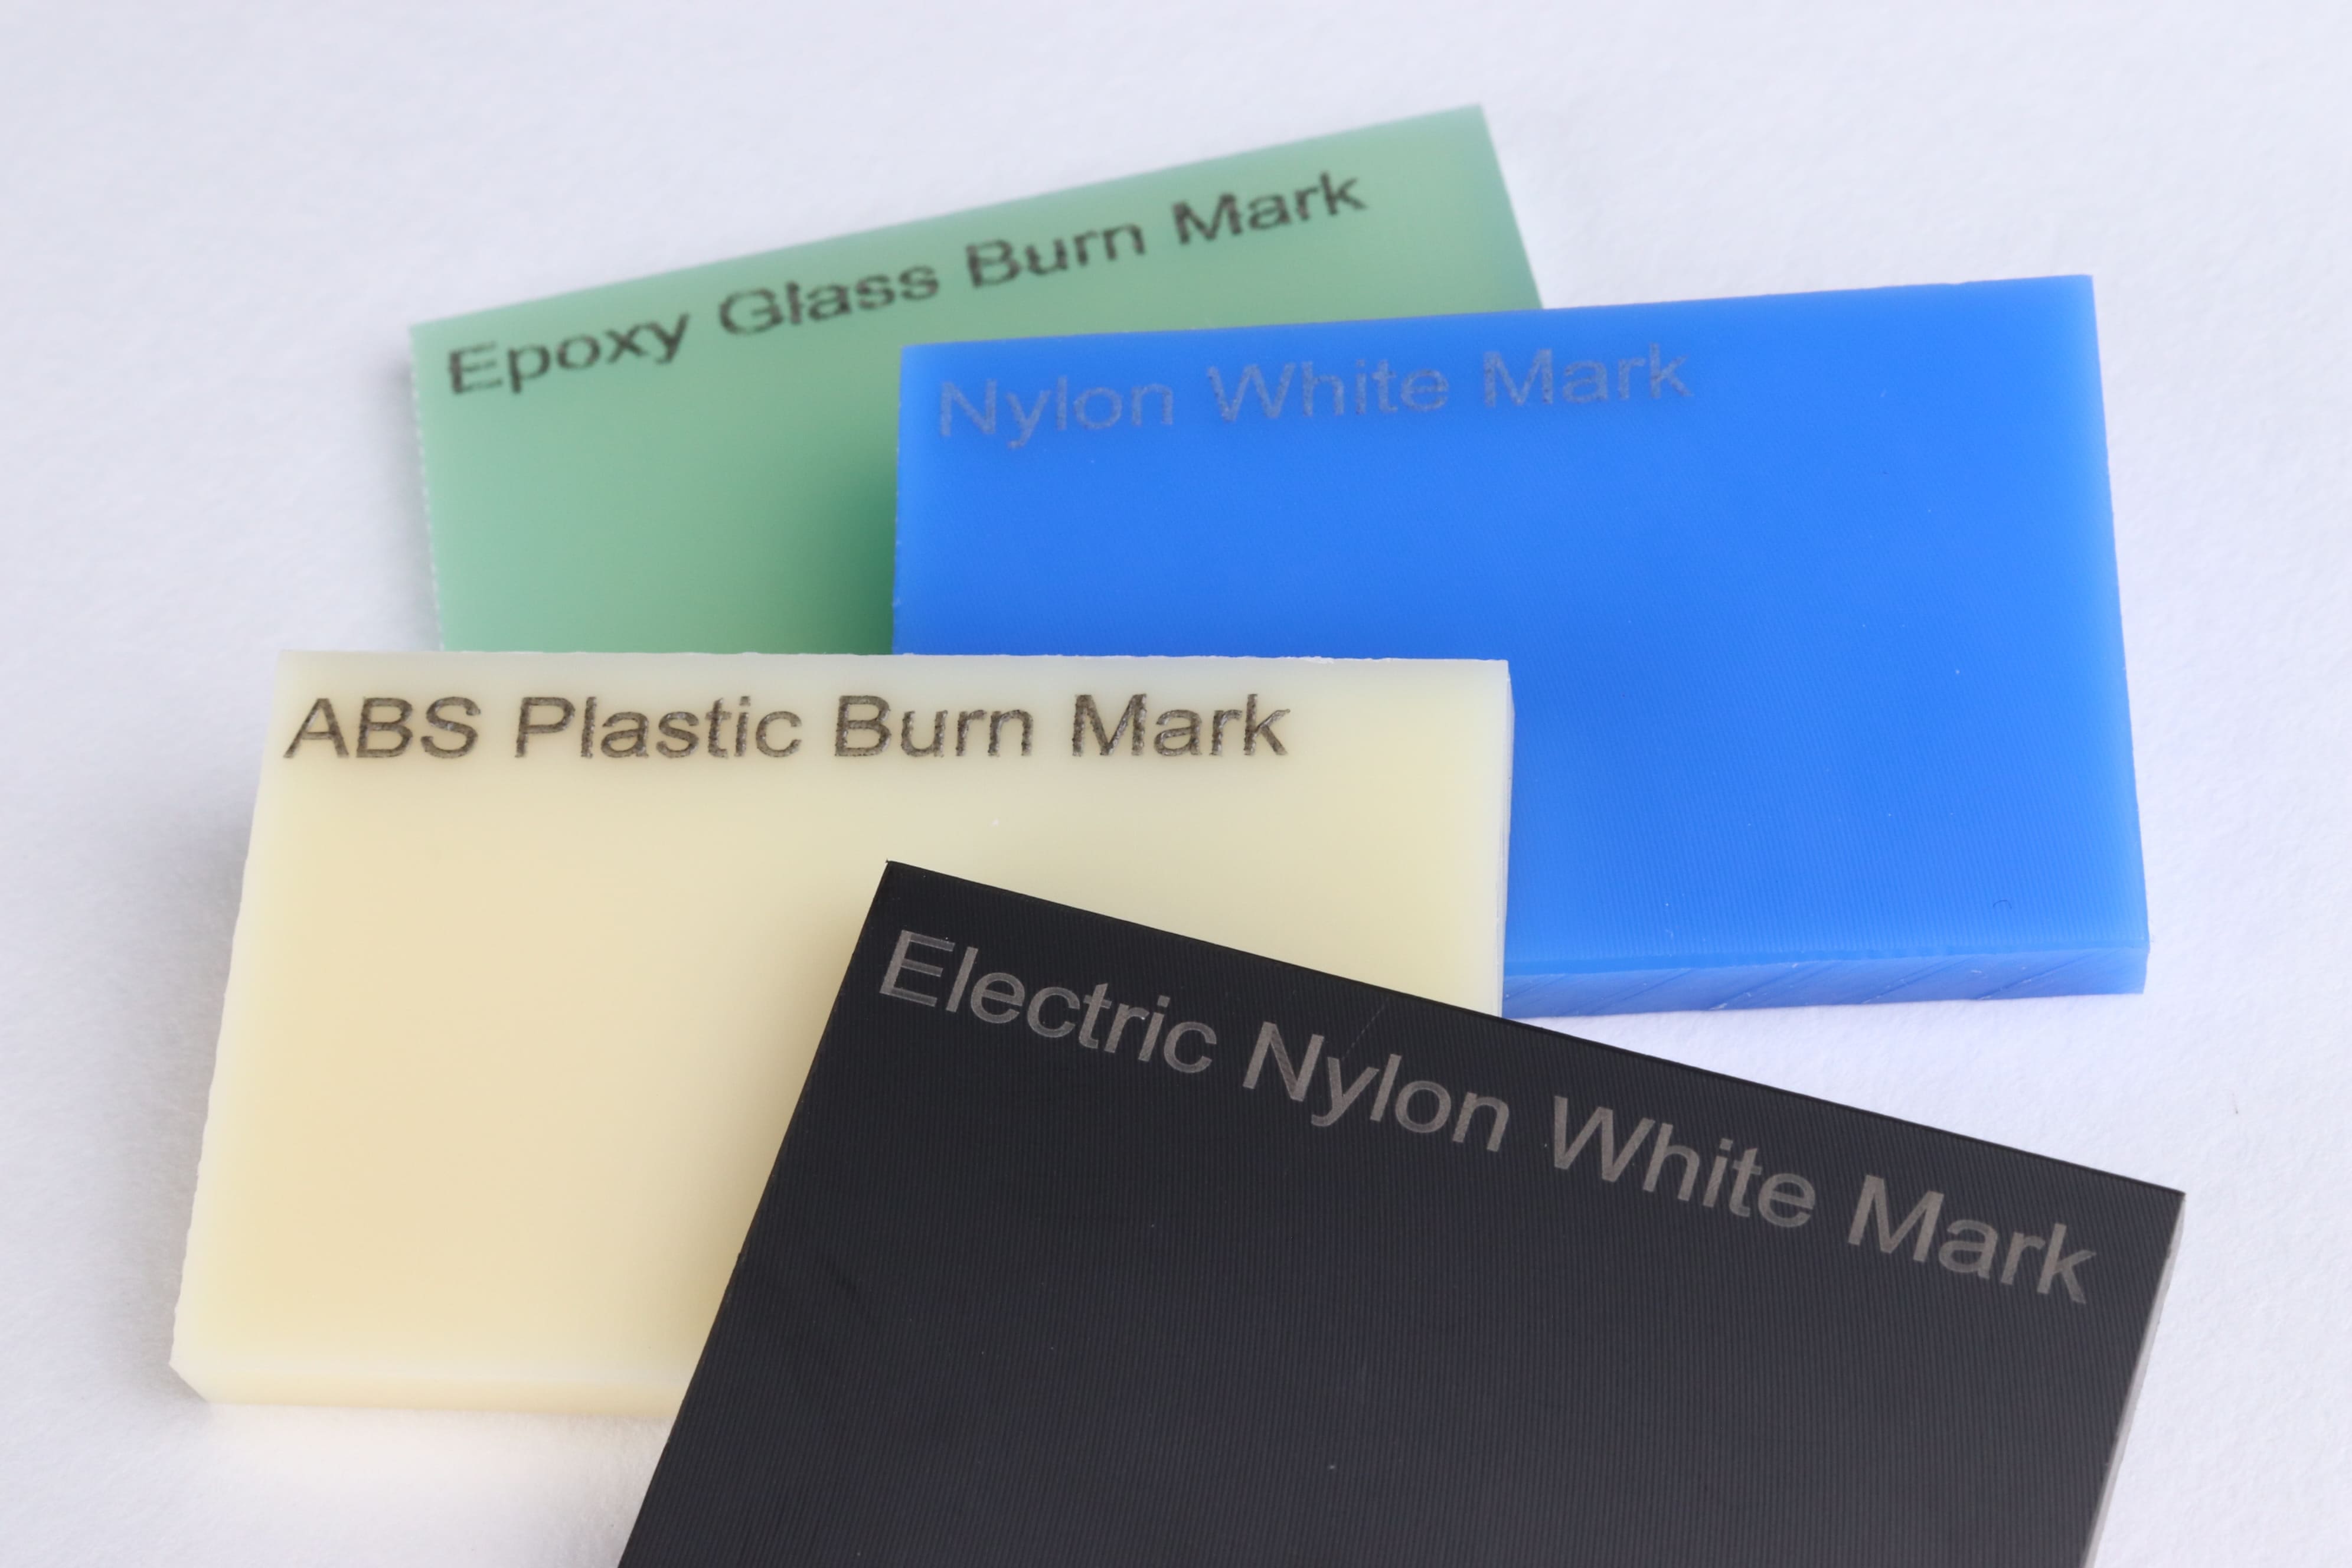 Image of four plastic materials engraved with the text 'Epoxy Glass Burn Mark,' 'Nylon White Mark,' 'ABS Plastic Burn Mark,' and 'Electric Nylon White Mark,' respectively.